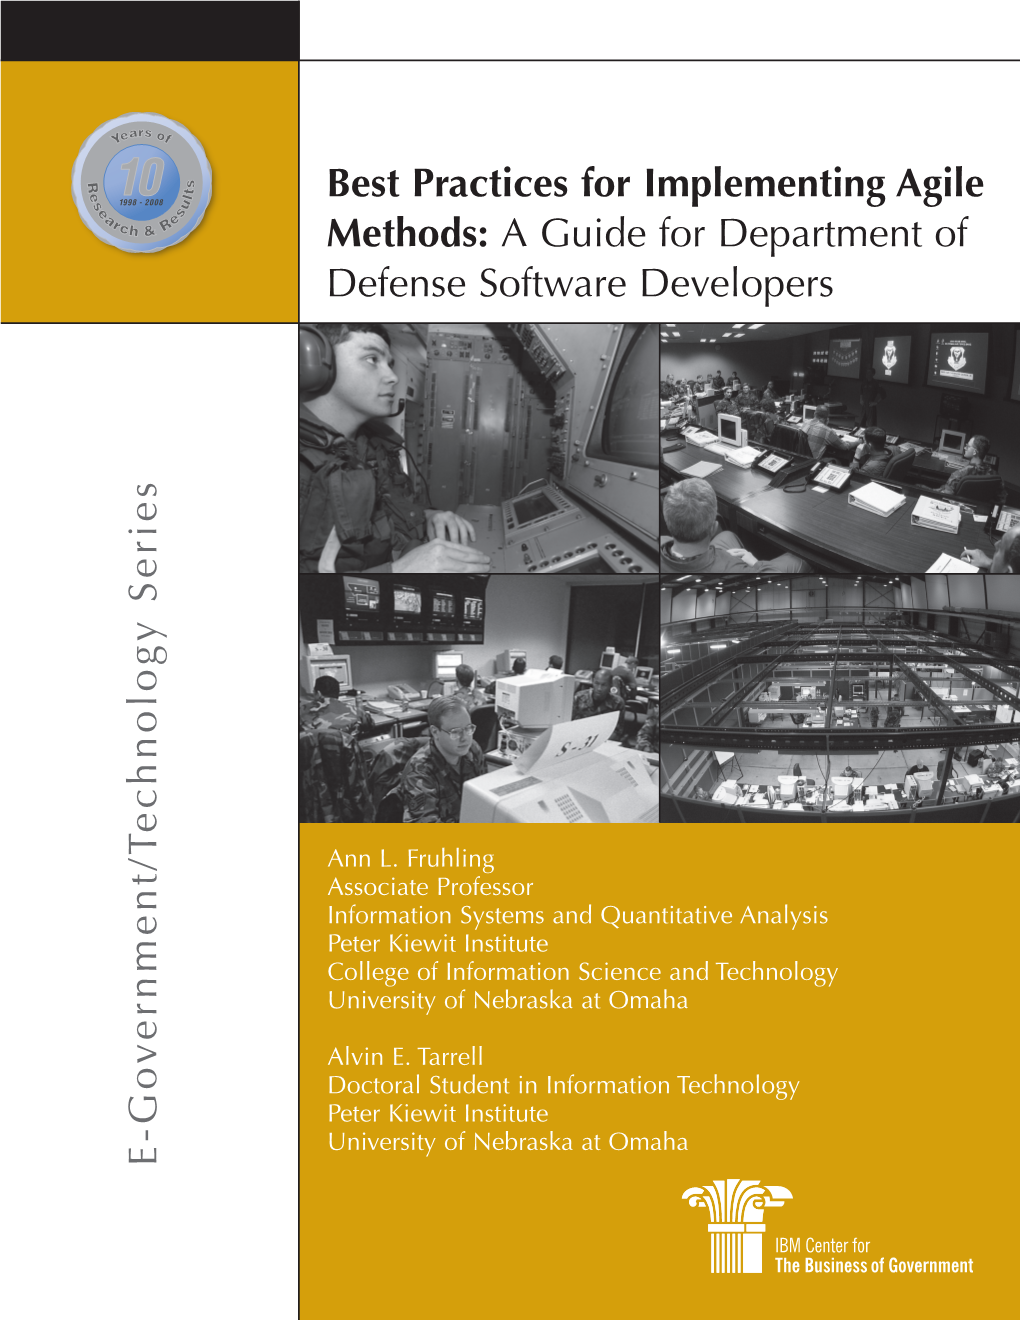 Best Practices for Implementing Agile Methods: a Guide for Department of Defense Software Developers